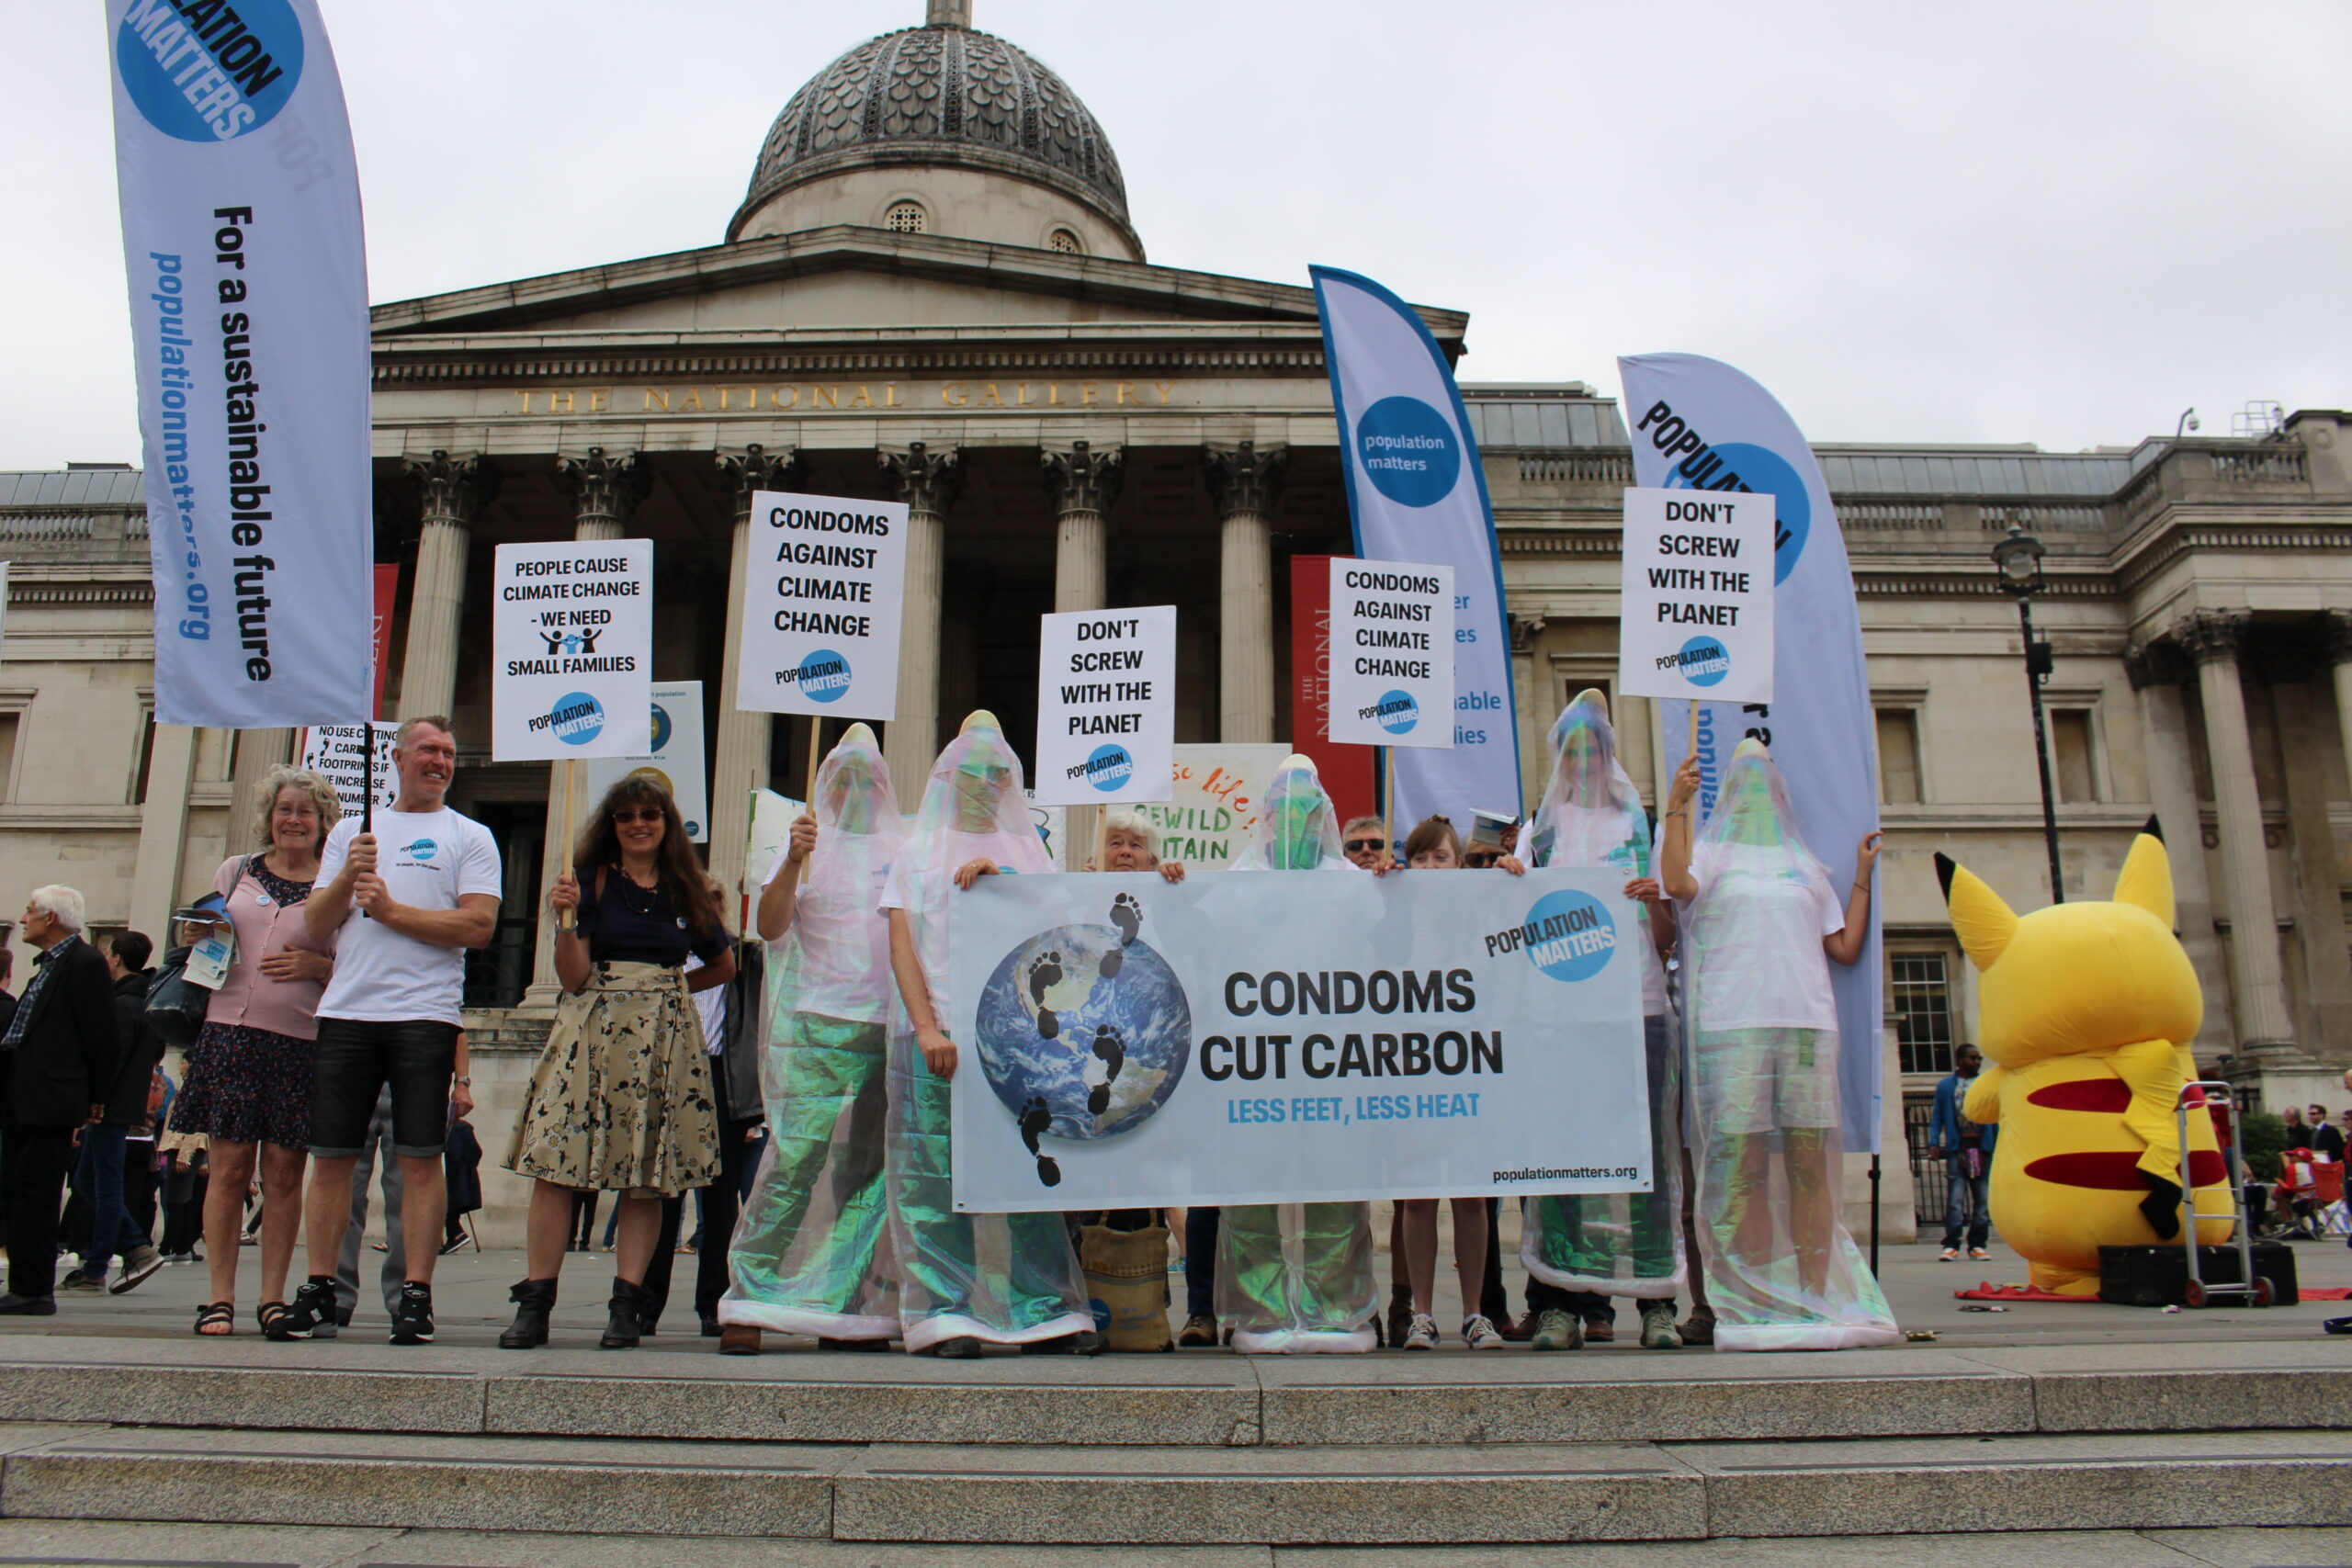 Condoms cut carbon – Population Matters at the Mass Climate Lobby